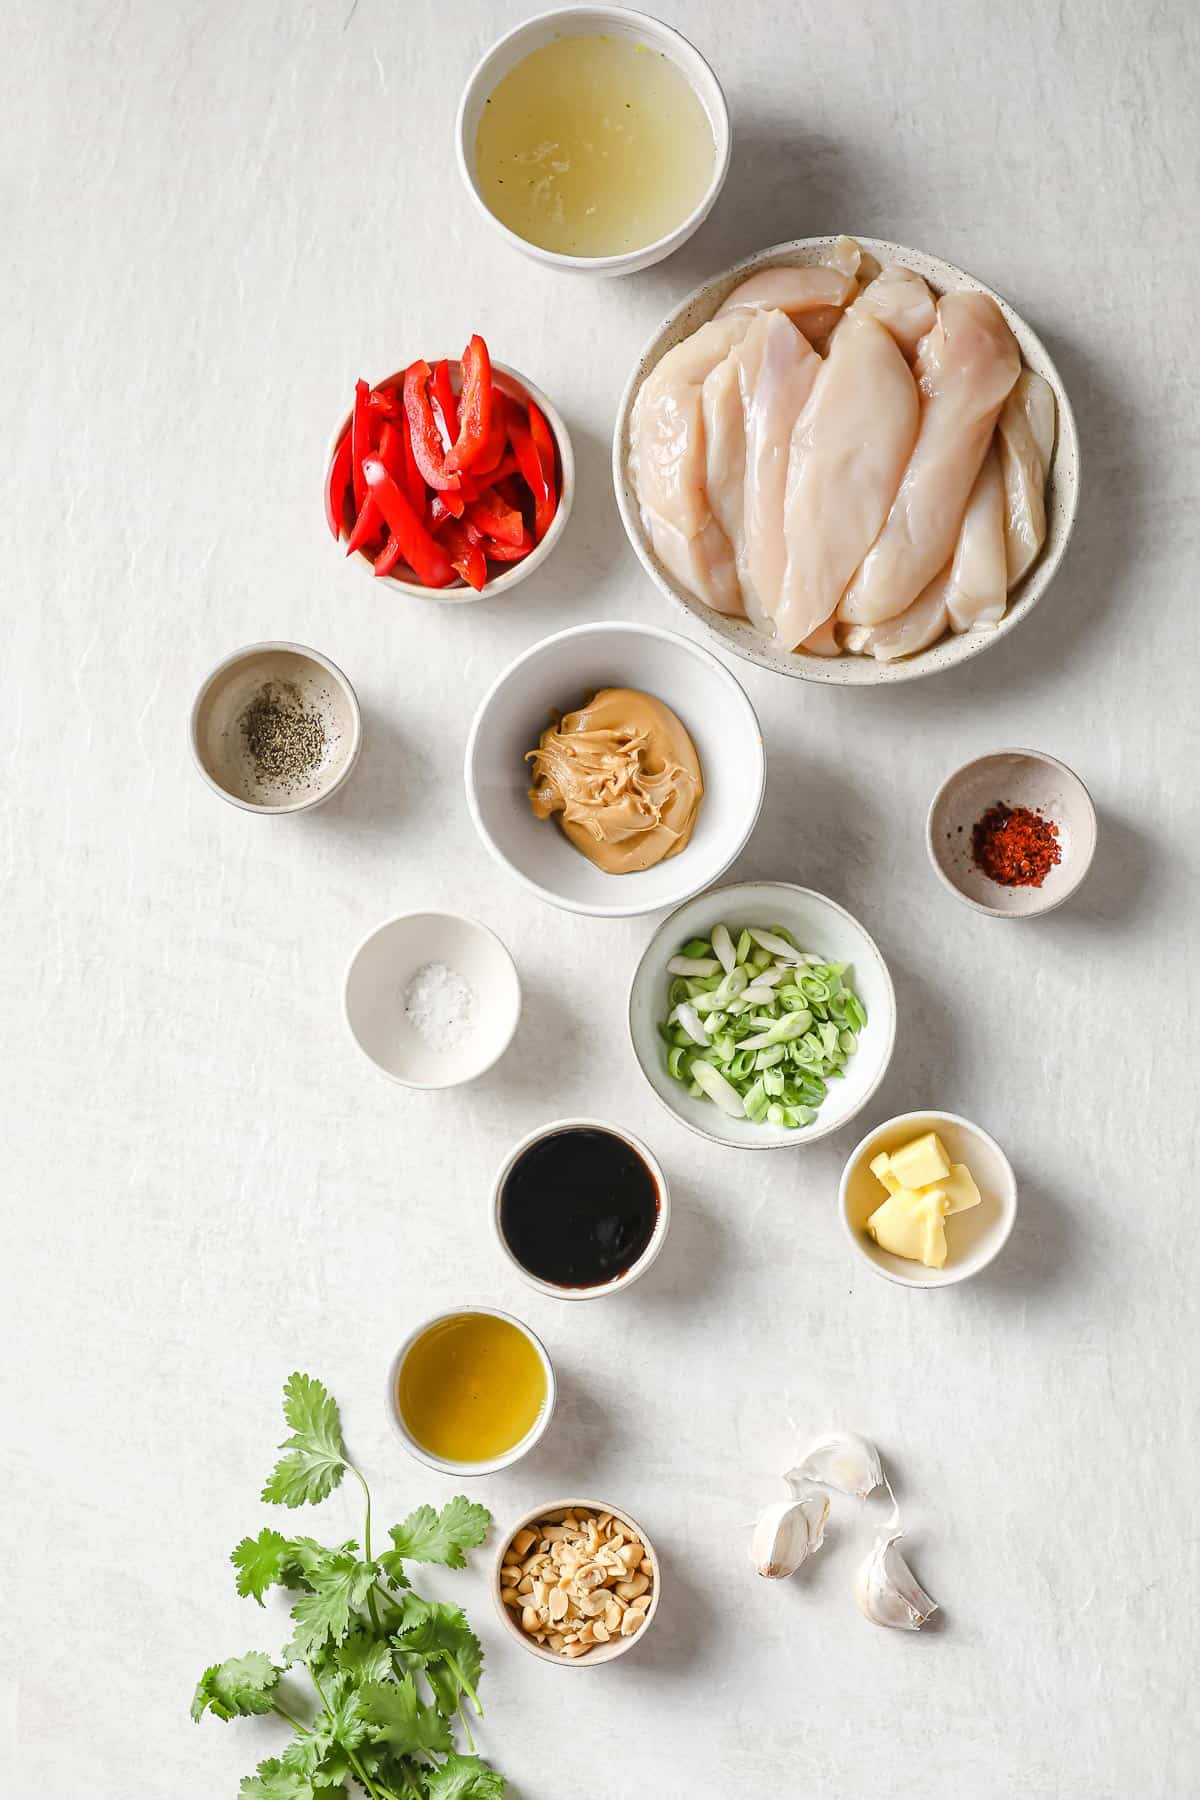 ingredients to make peanut butter chicken - chicken, peanut butter, red peppers, soy sauce, green onions olive oil